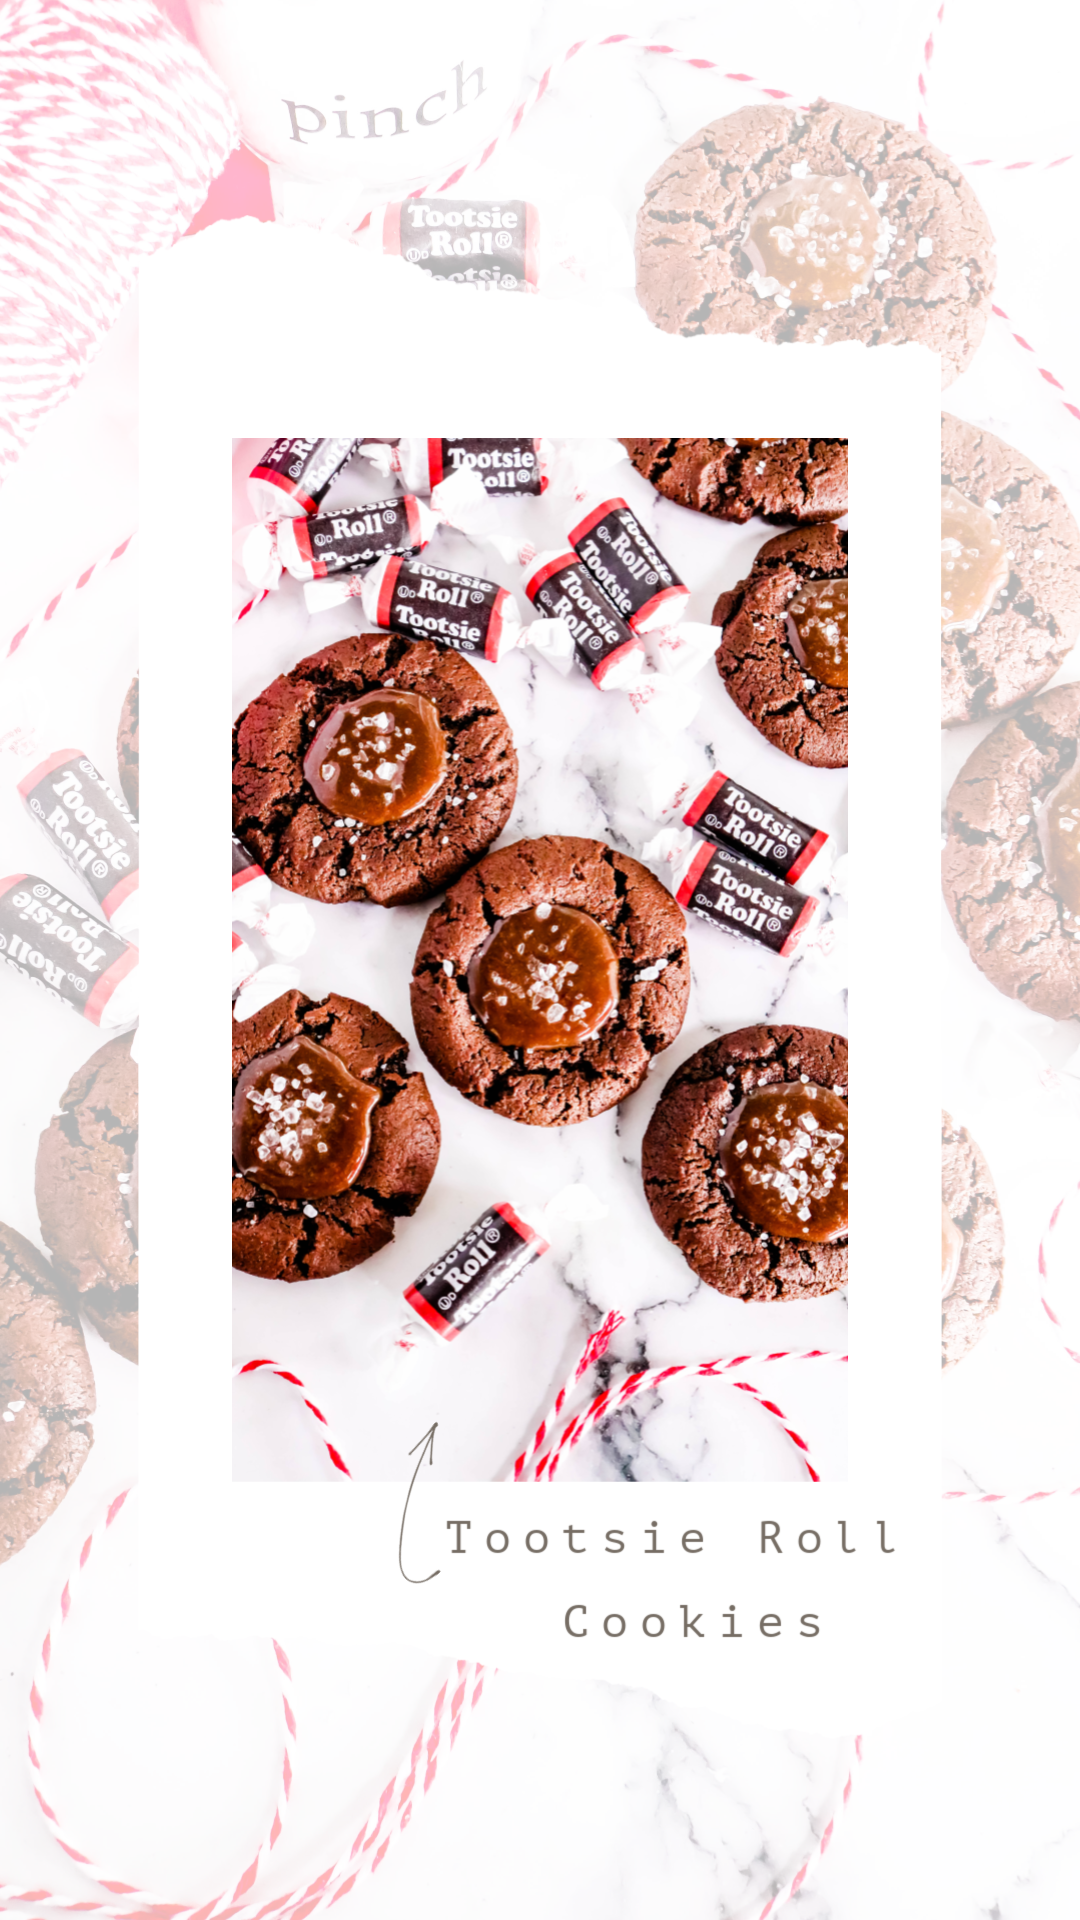 Tootsie Roll Cookies - These chocolate Tootsie Roll® cookies take the forgotten and sometimes disregarded Tootsie Roll® to a whole new level.  Take the humble Tootsie Roll from zero to hero with these homemade chocolate thumbprint cookies filled with an easy to make Tootsie Roll® ganache and sprinkled with sea salt. via @bigbearswife